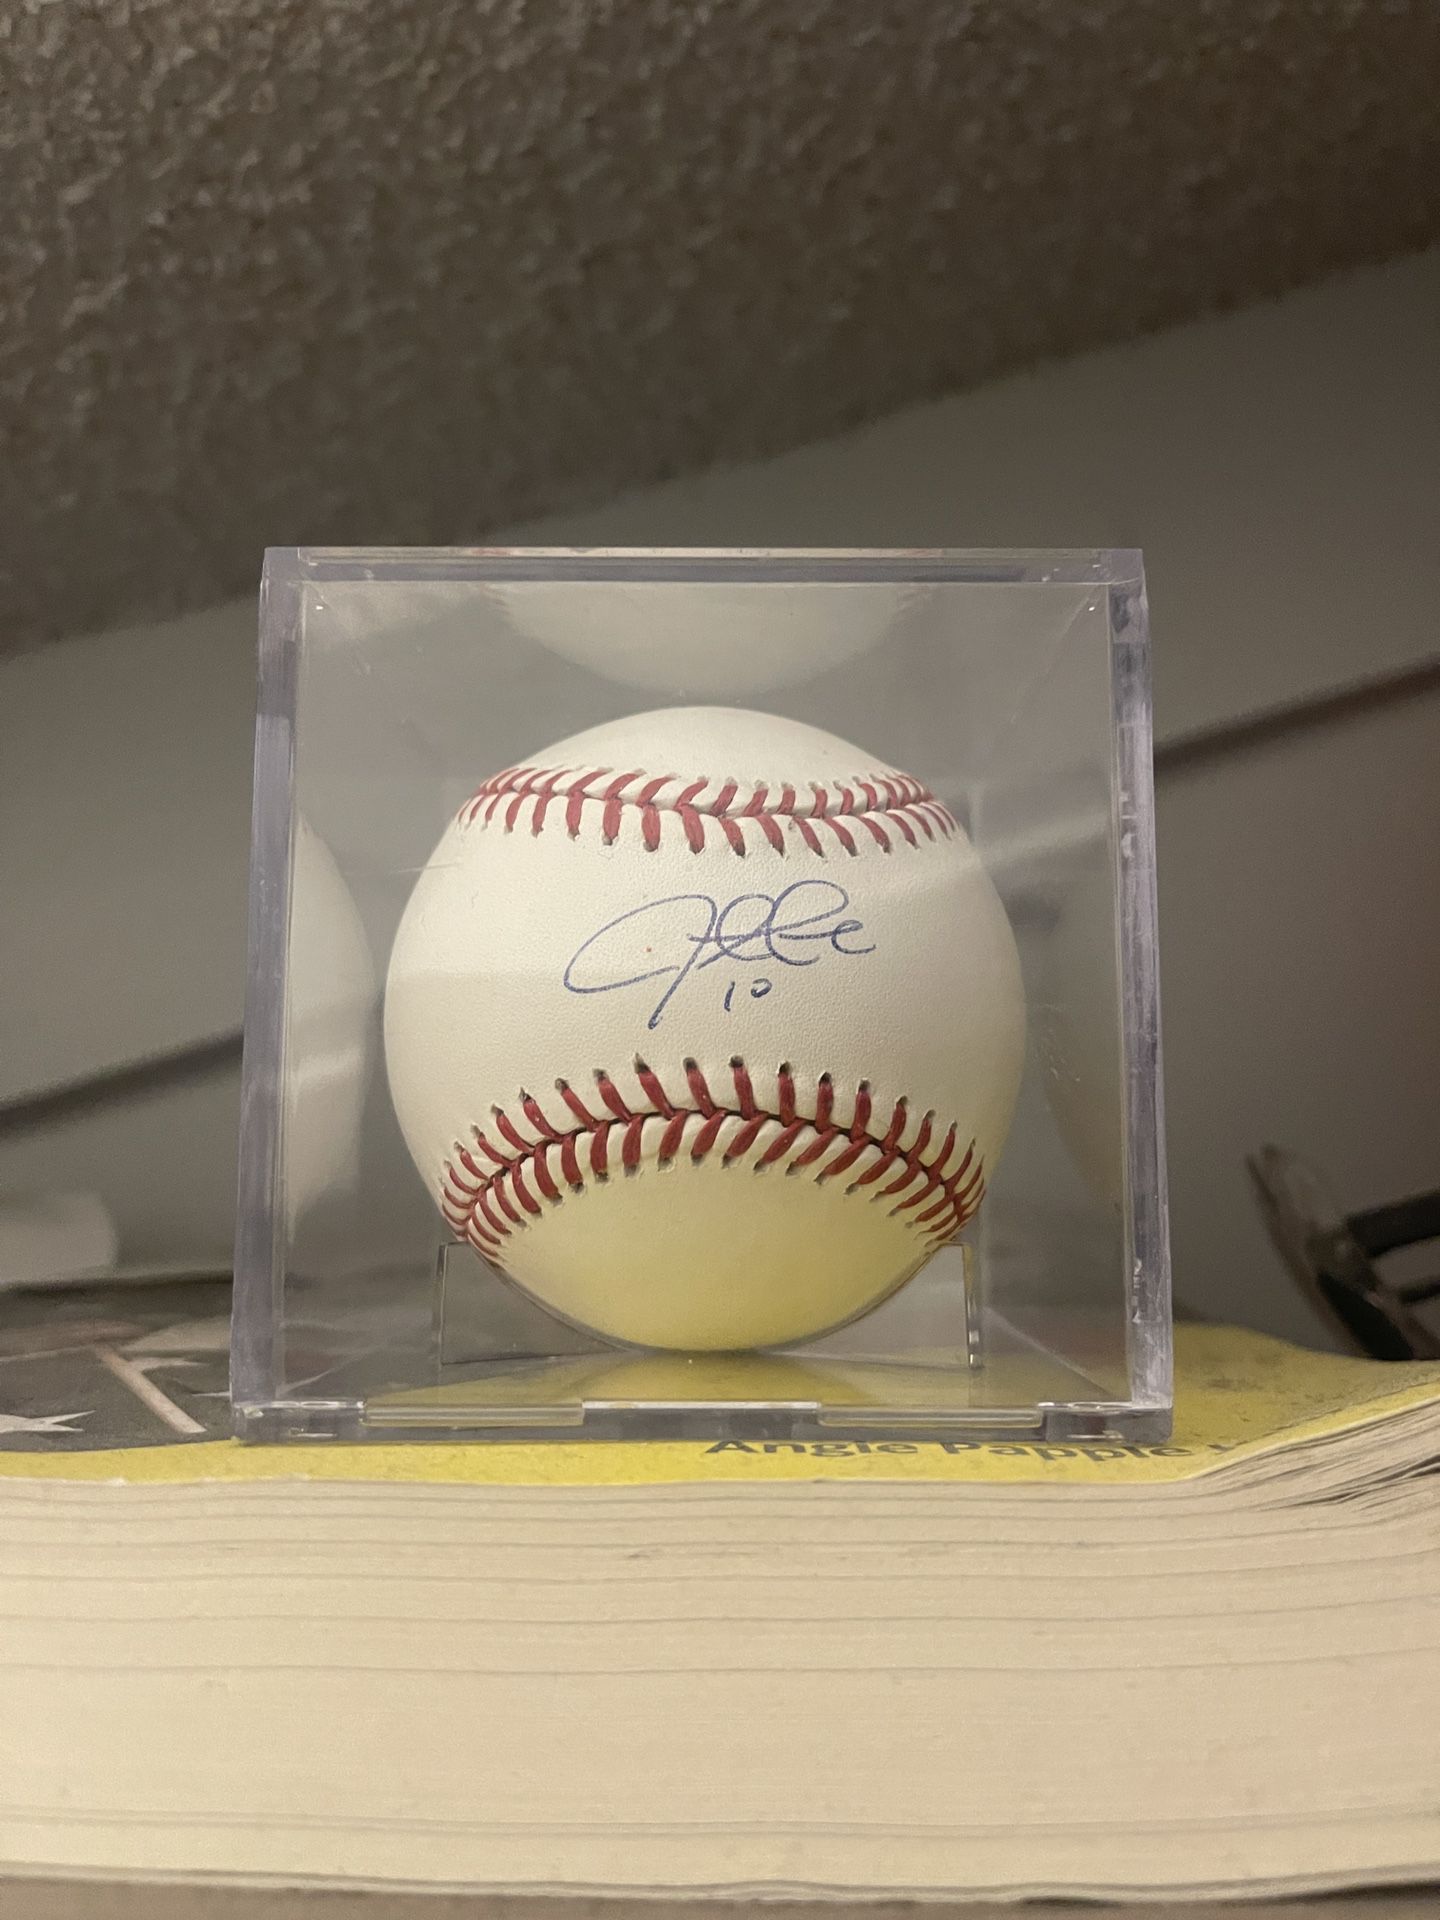 Justin Turner Autographed Baseball for Sale in Rancho Suey, CA - OfferUp